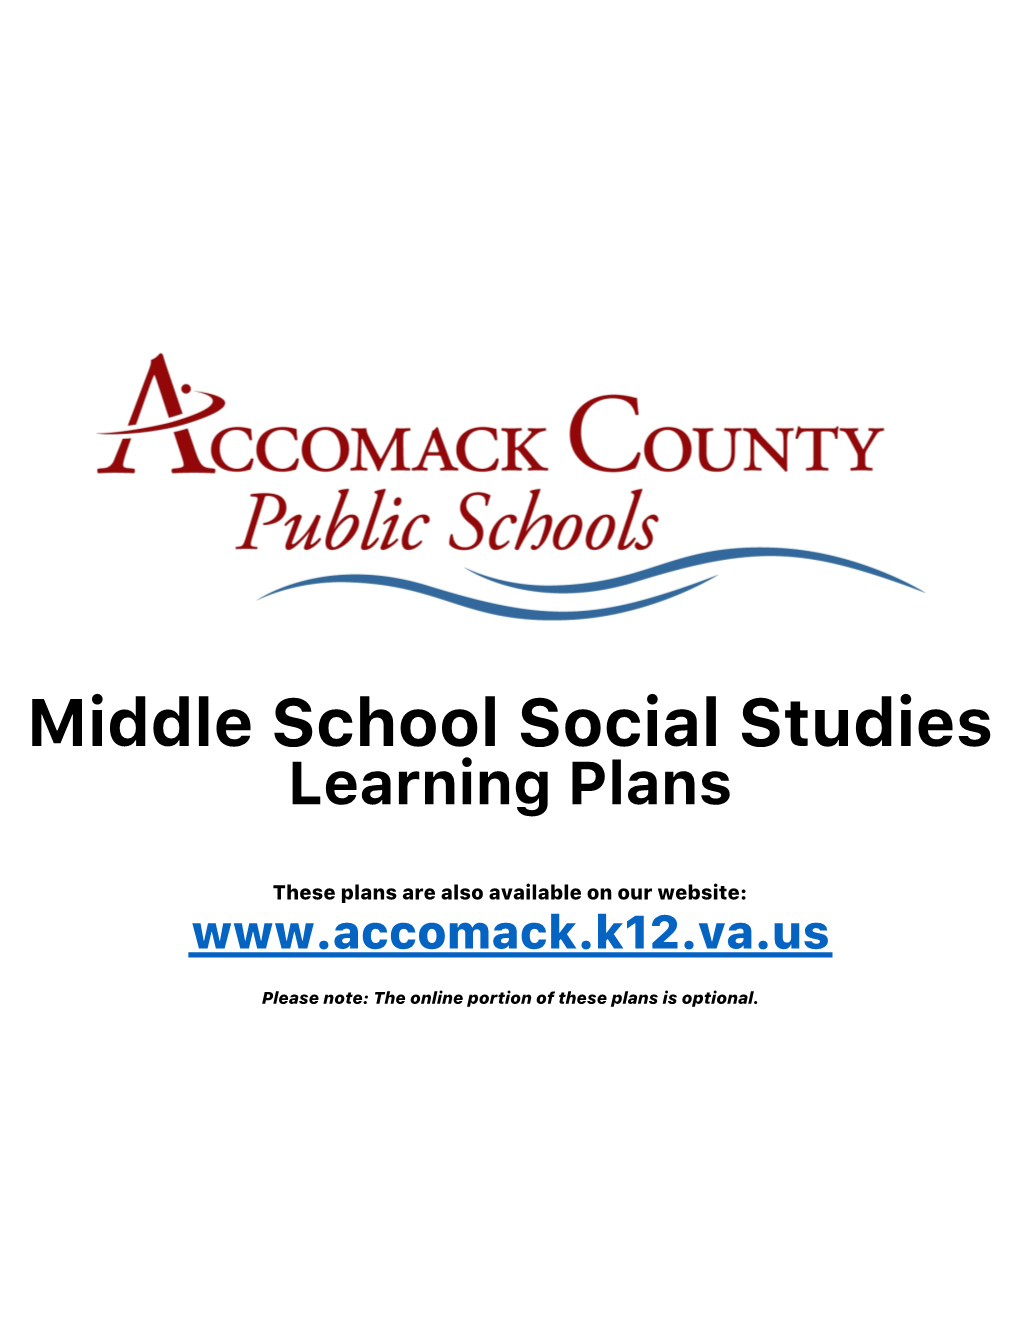 Middle School Social Studies Learning Plans